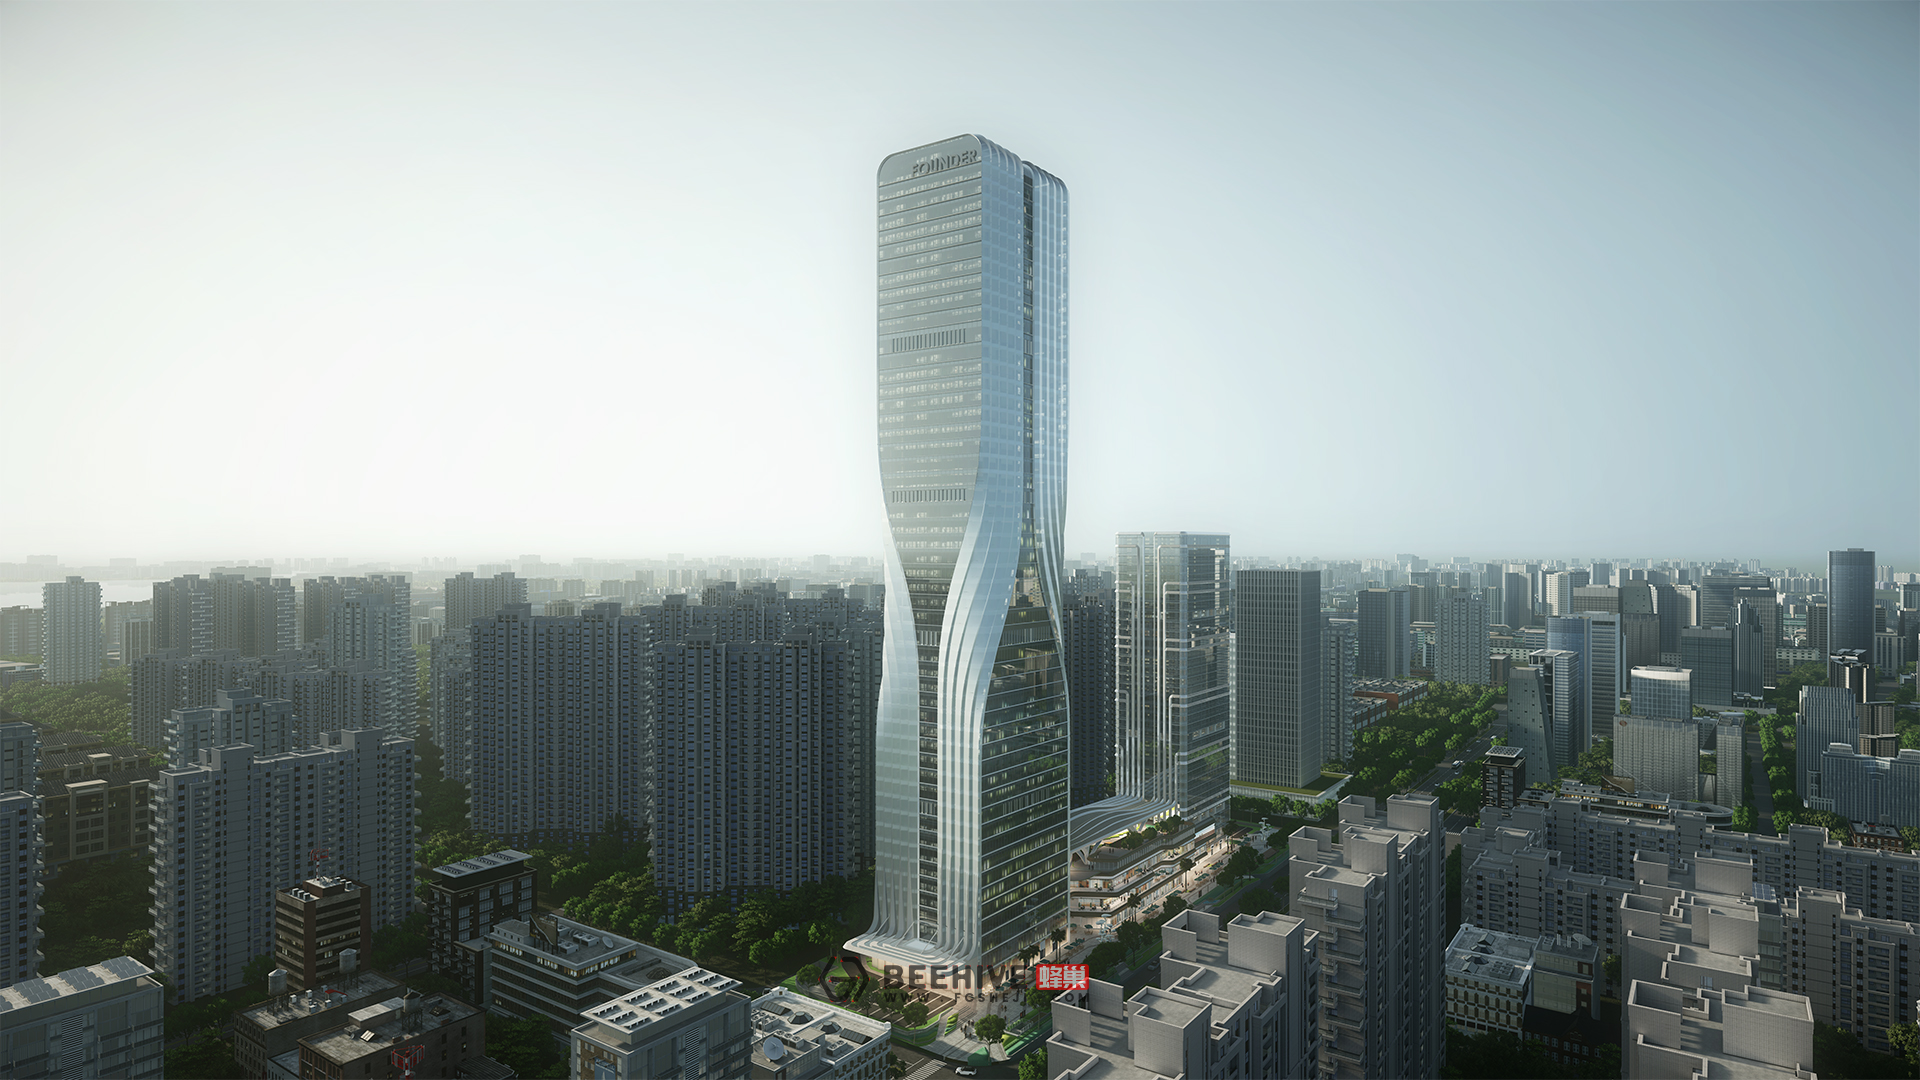 Wuhan Founder International Financial Center. Design and Project Architect: Aedas. Client: PKU Resources.